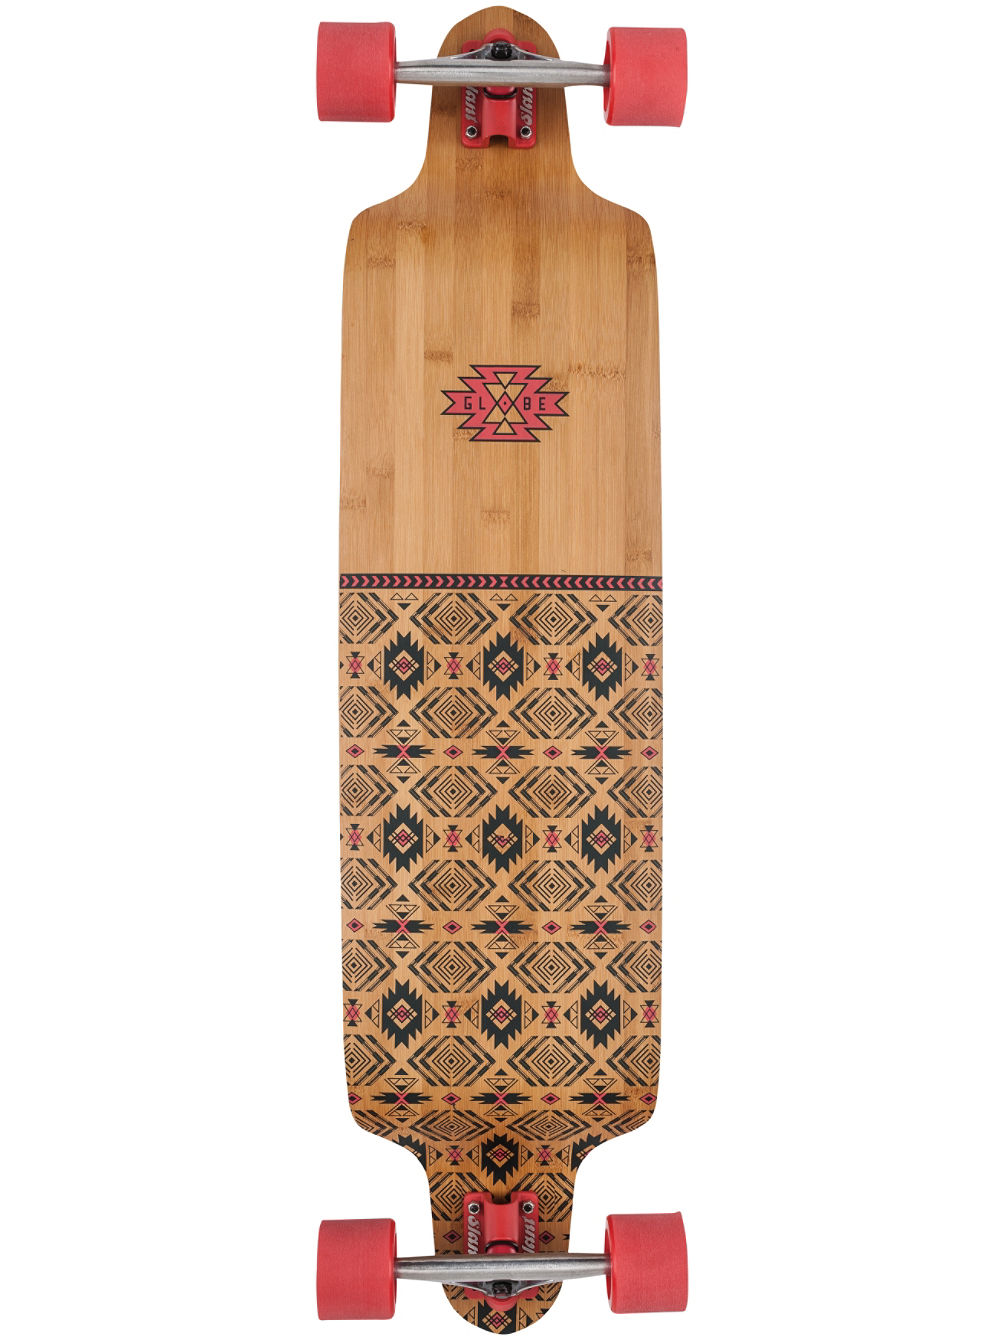 Bannerstone 41&amp;#034; x 9.75&amp;#034; Longboard complet